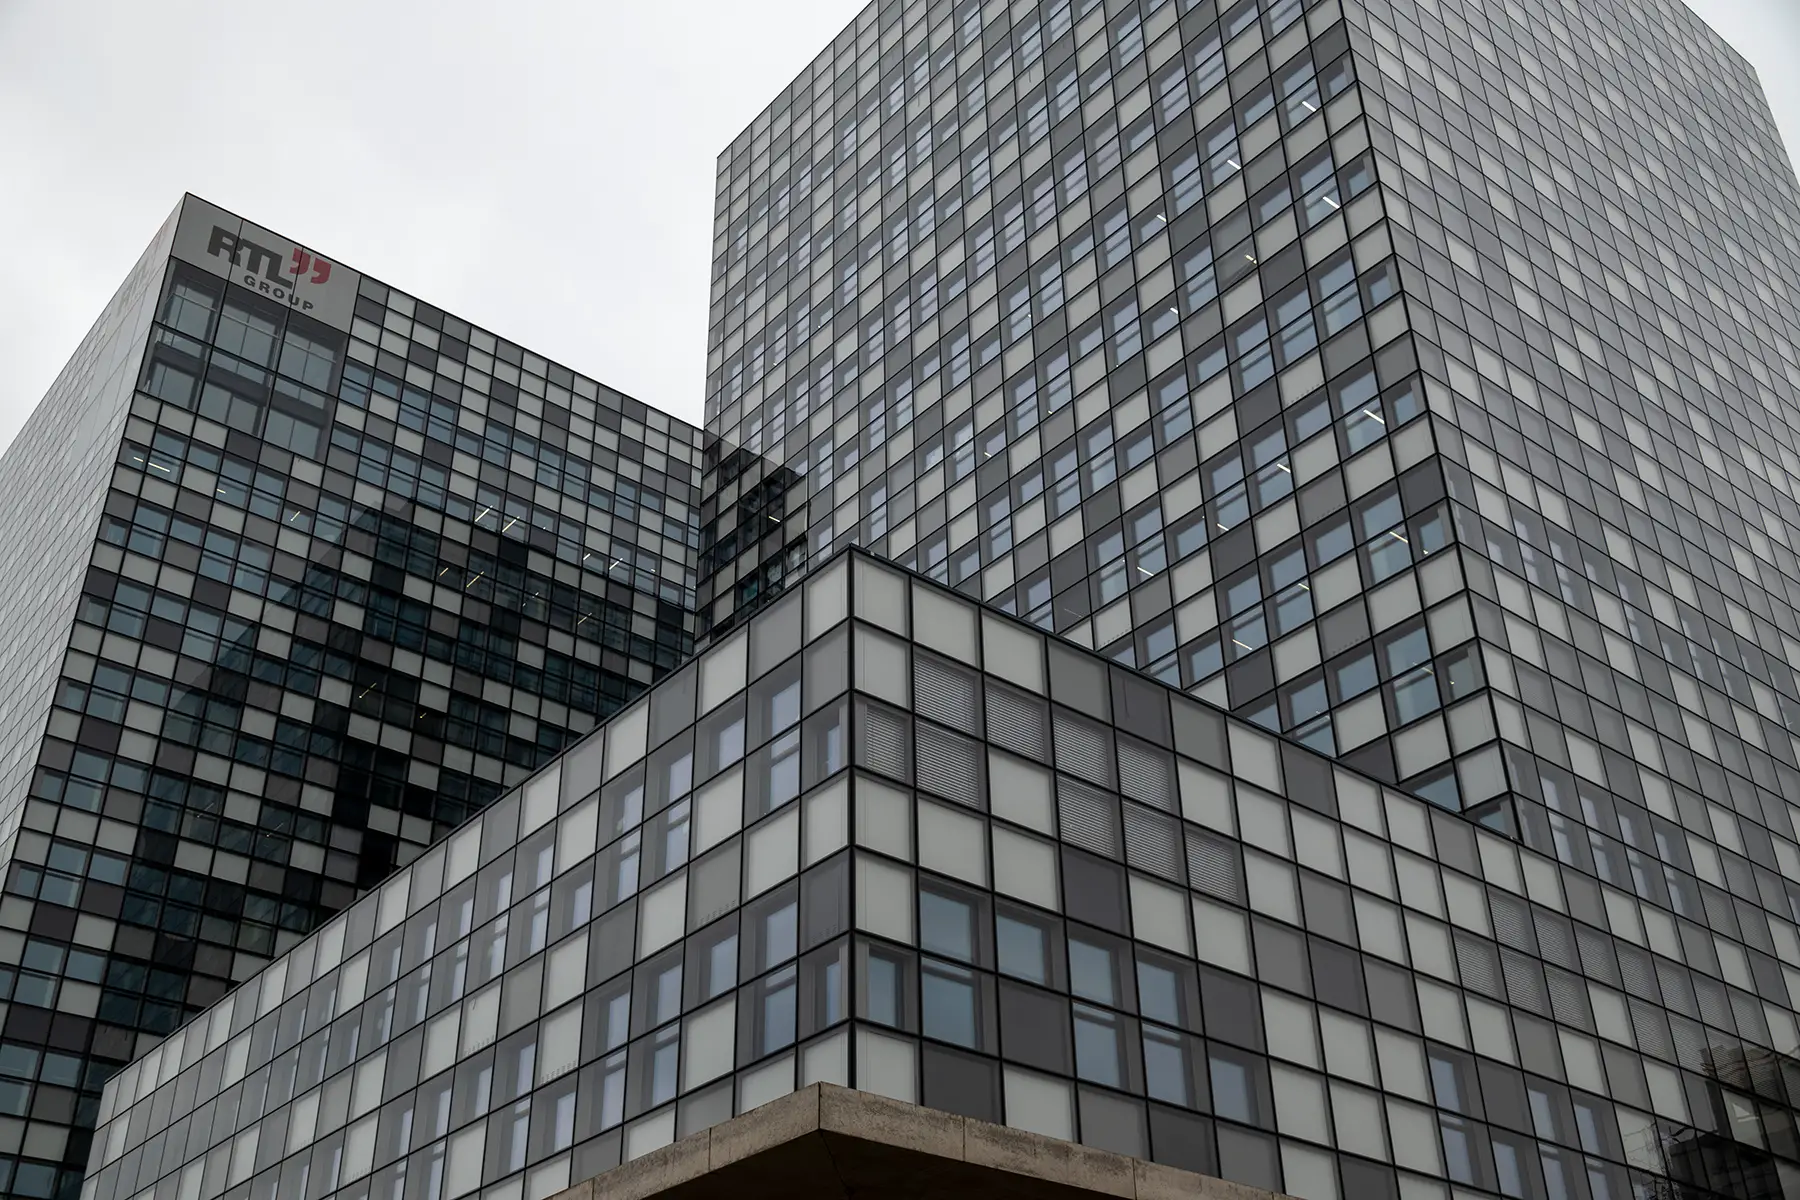 RTL headquarters in Luxembourg: a large skyscraper with three towers, covered in square windows